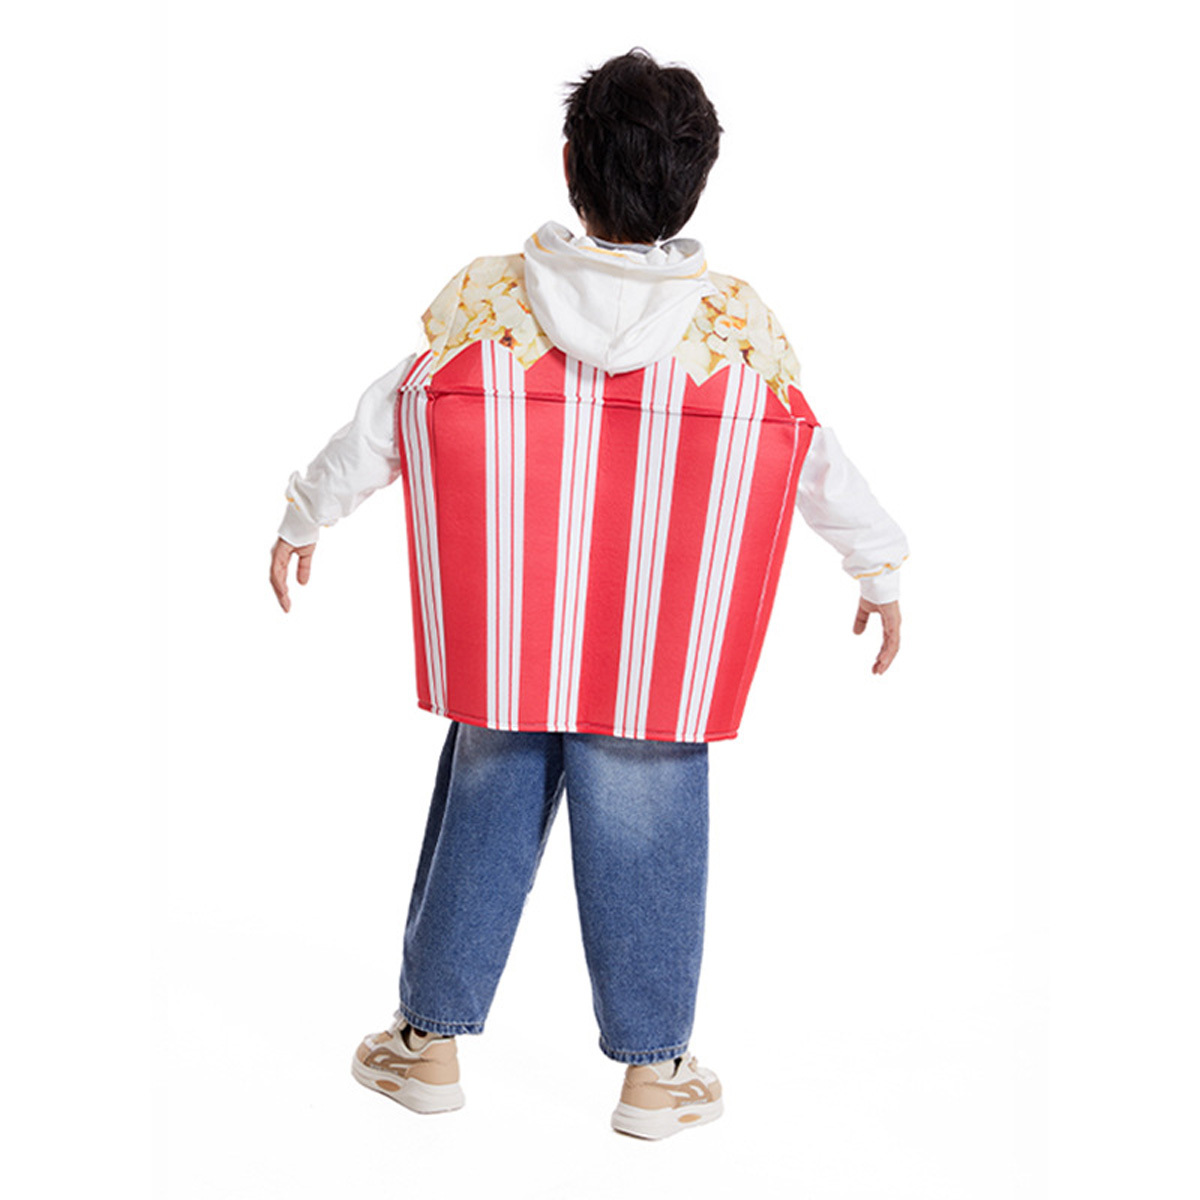 Popcorn Holiday Party Outfits Halloween Carnival Suit Cosplay Costume For Kids